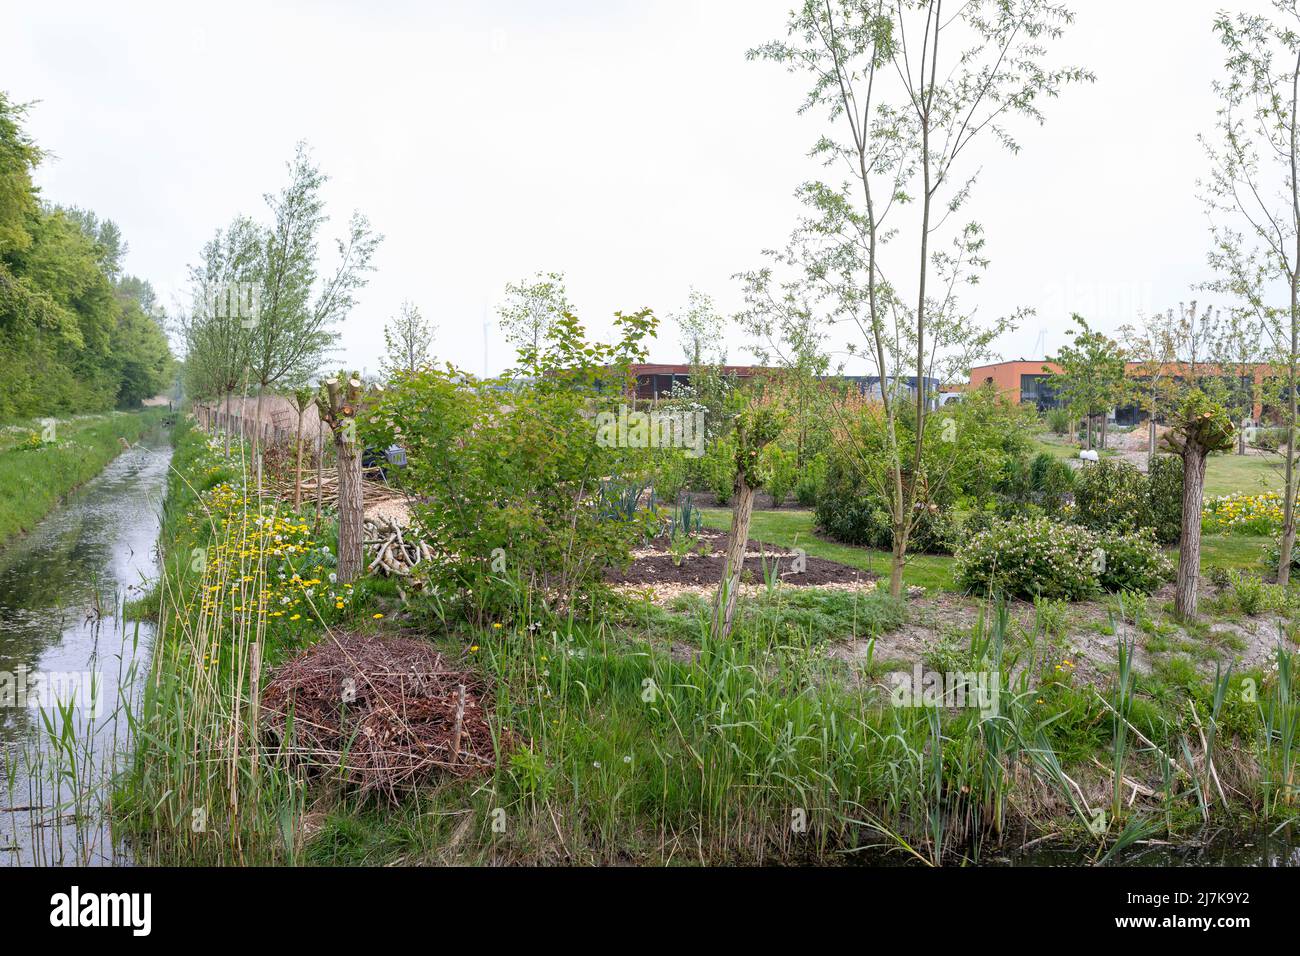 Perculture garden at Oosterwold eco village near Almere in the Netherlands Stock Photo